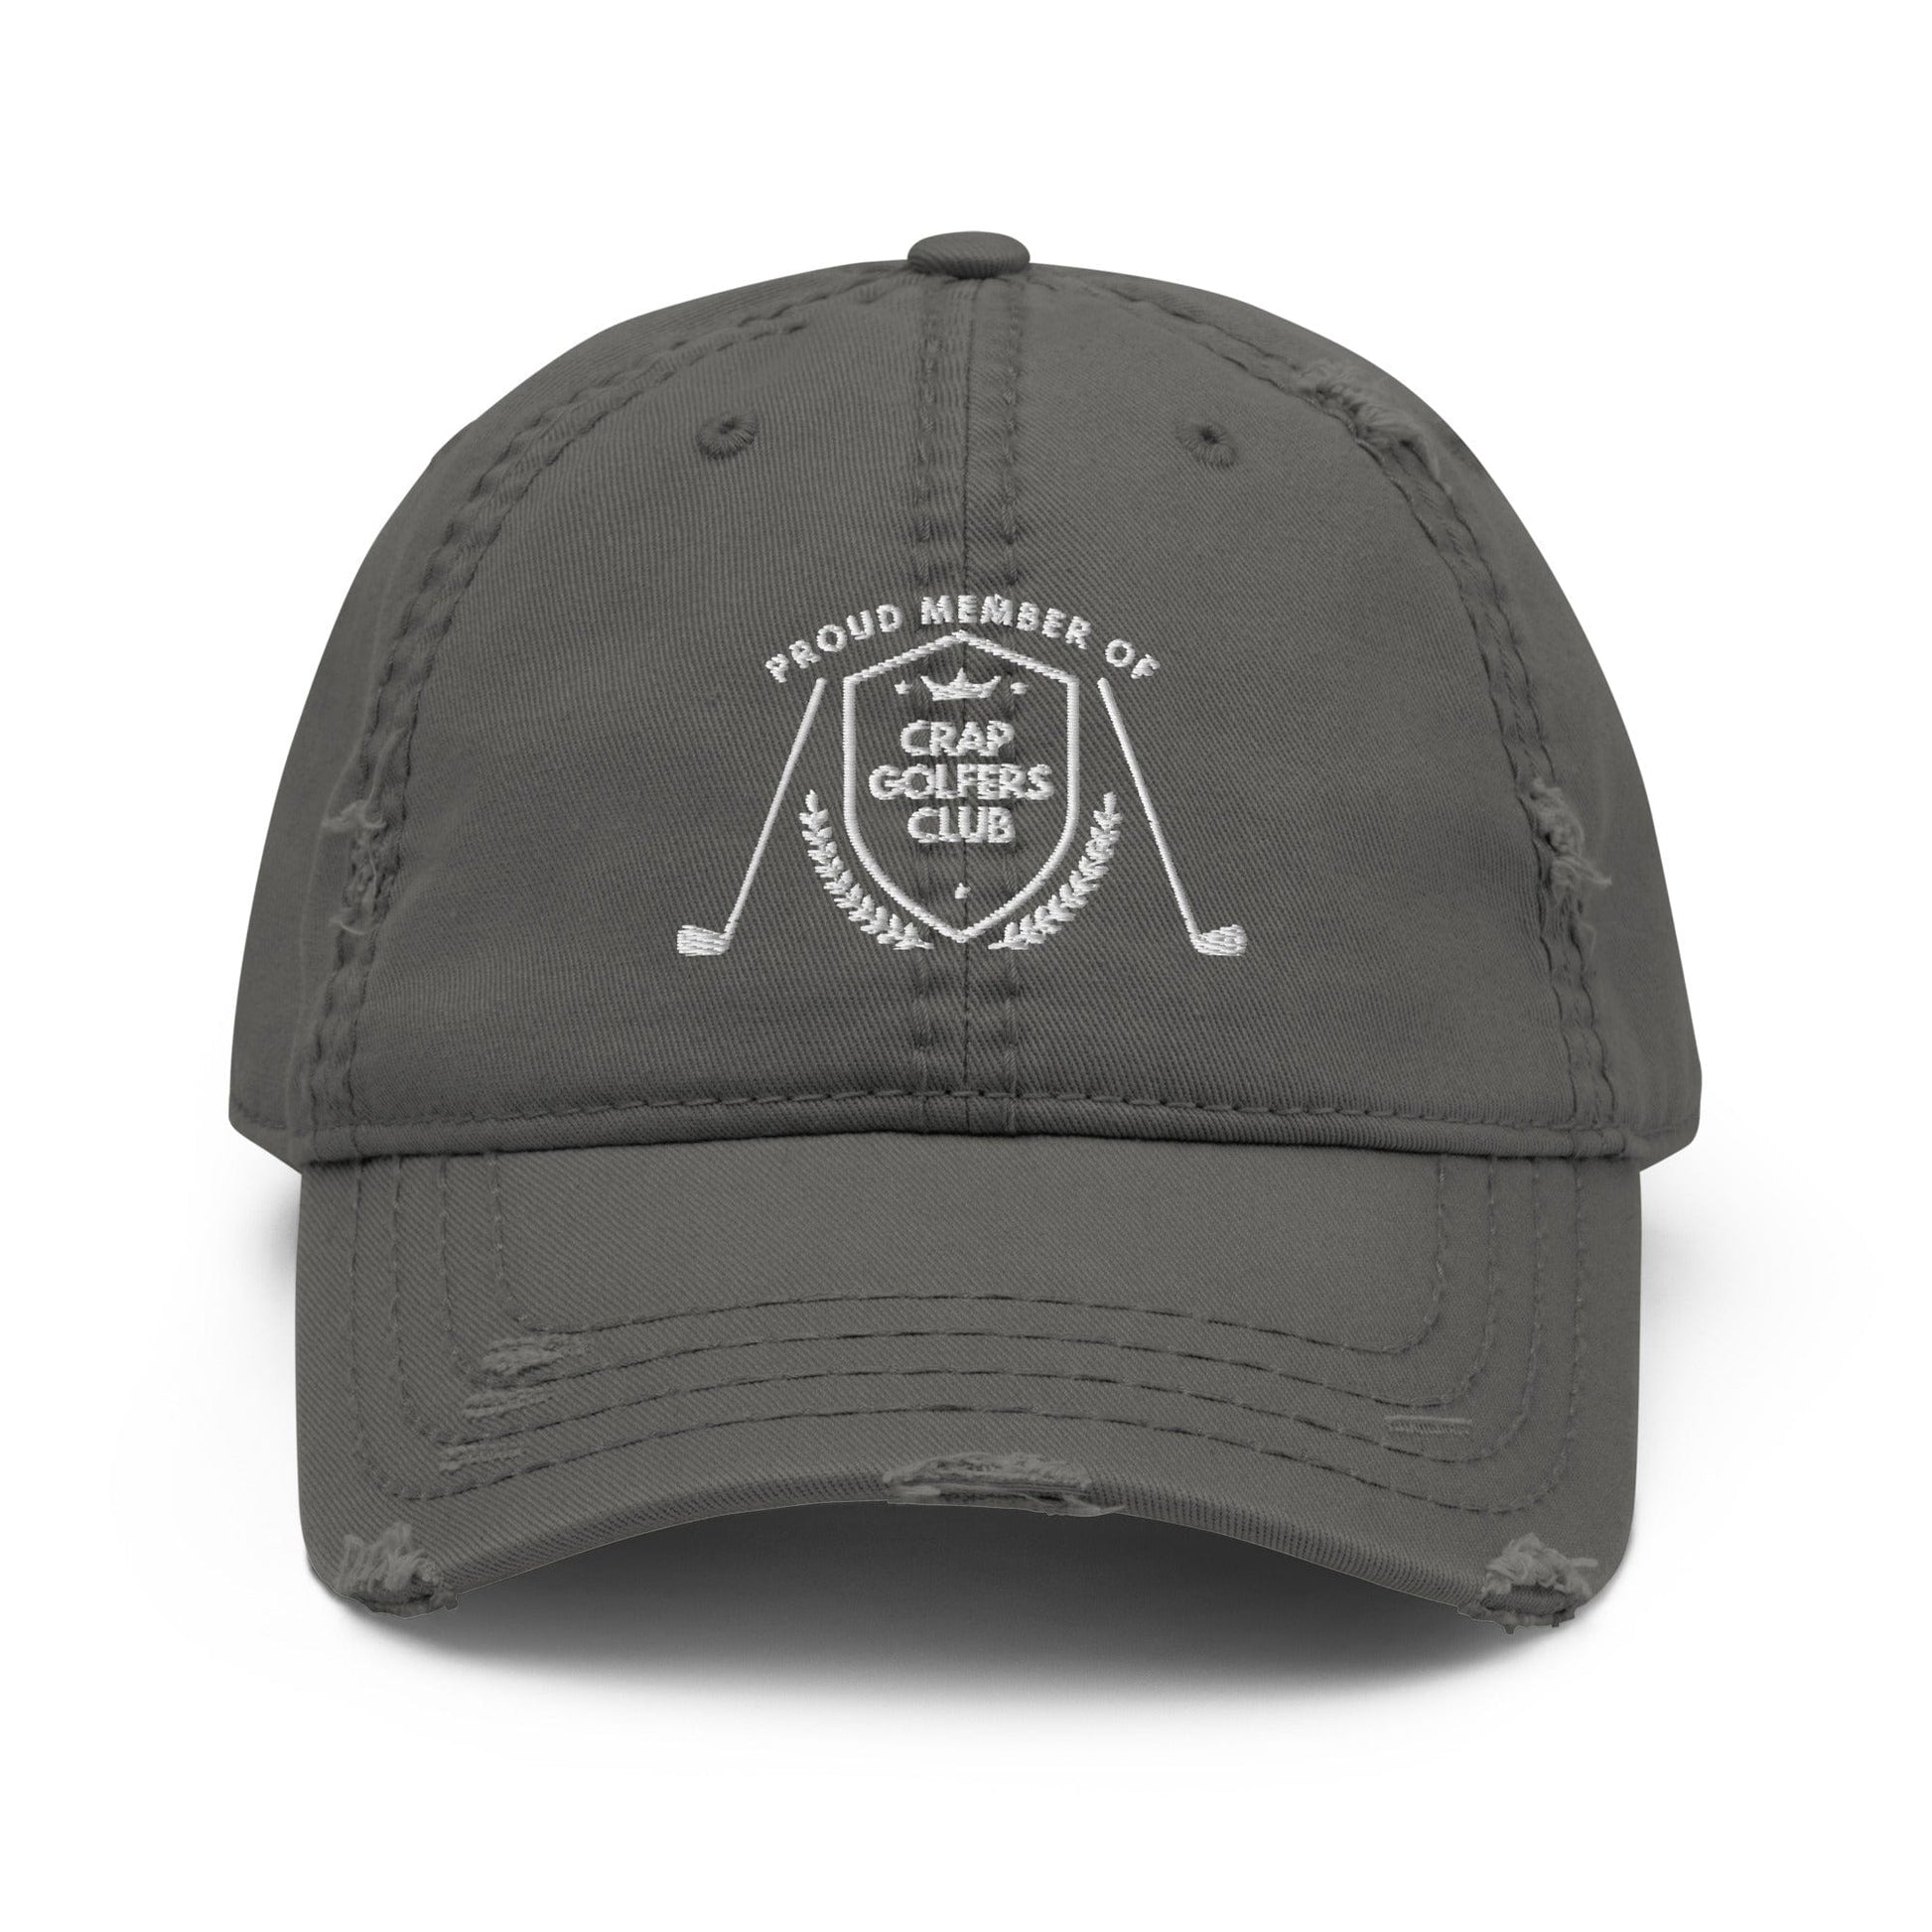 Funny Golfer Gifts  Distressed Cap Charcoal Grey Crap Golfers Club Distressed Hat